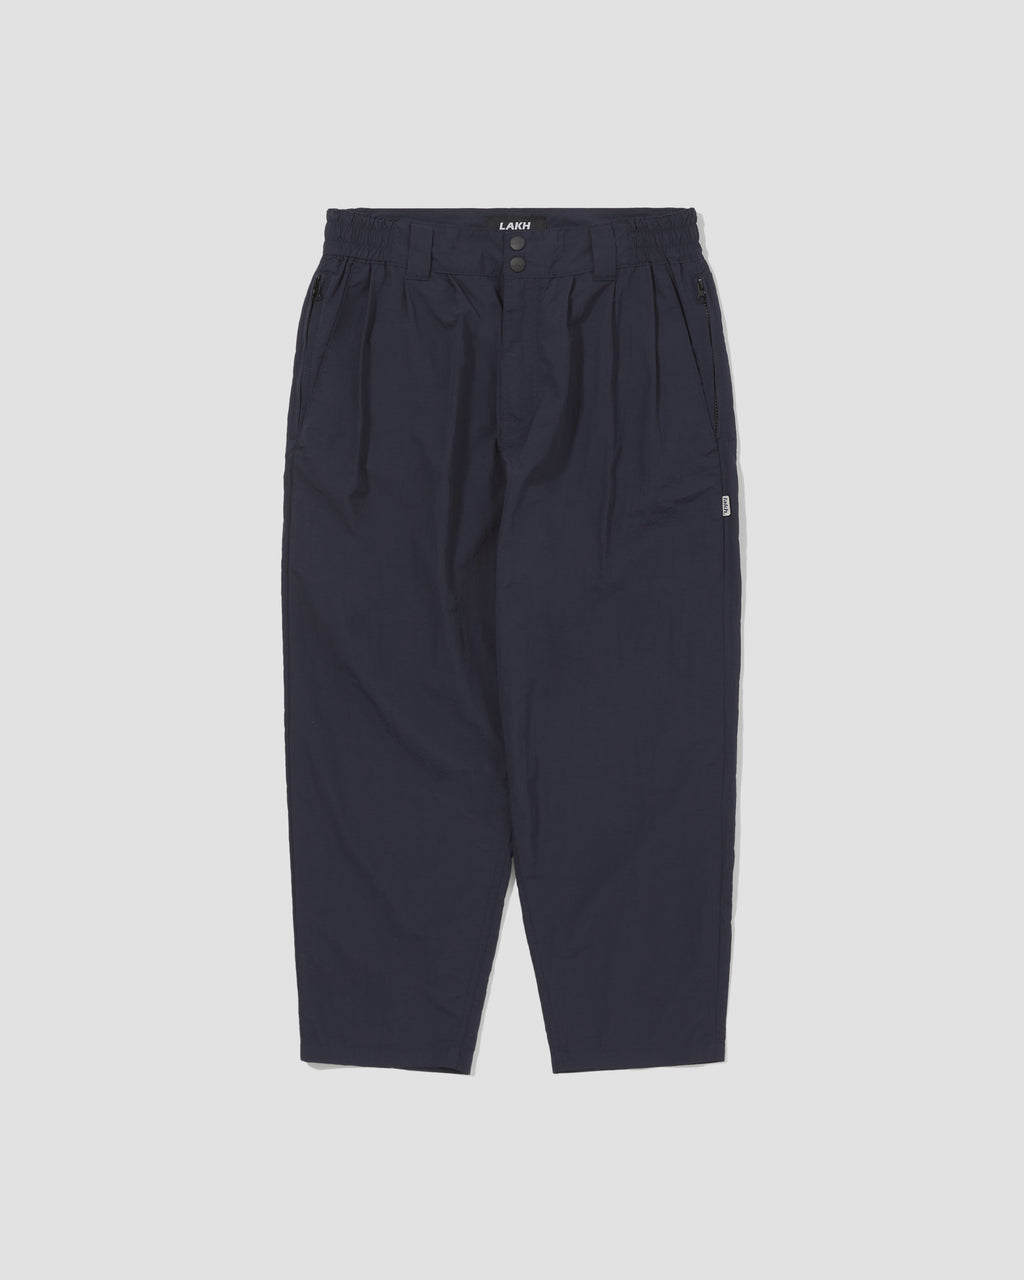 Lightweight Baggy Tapered Pants - Navy